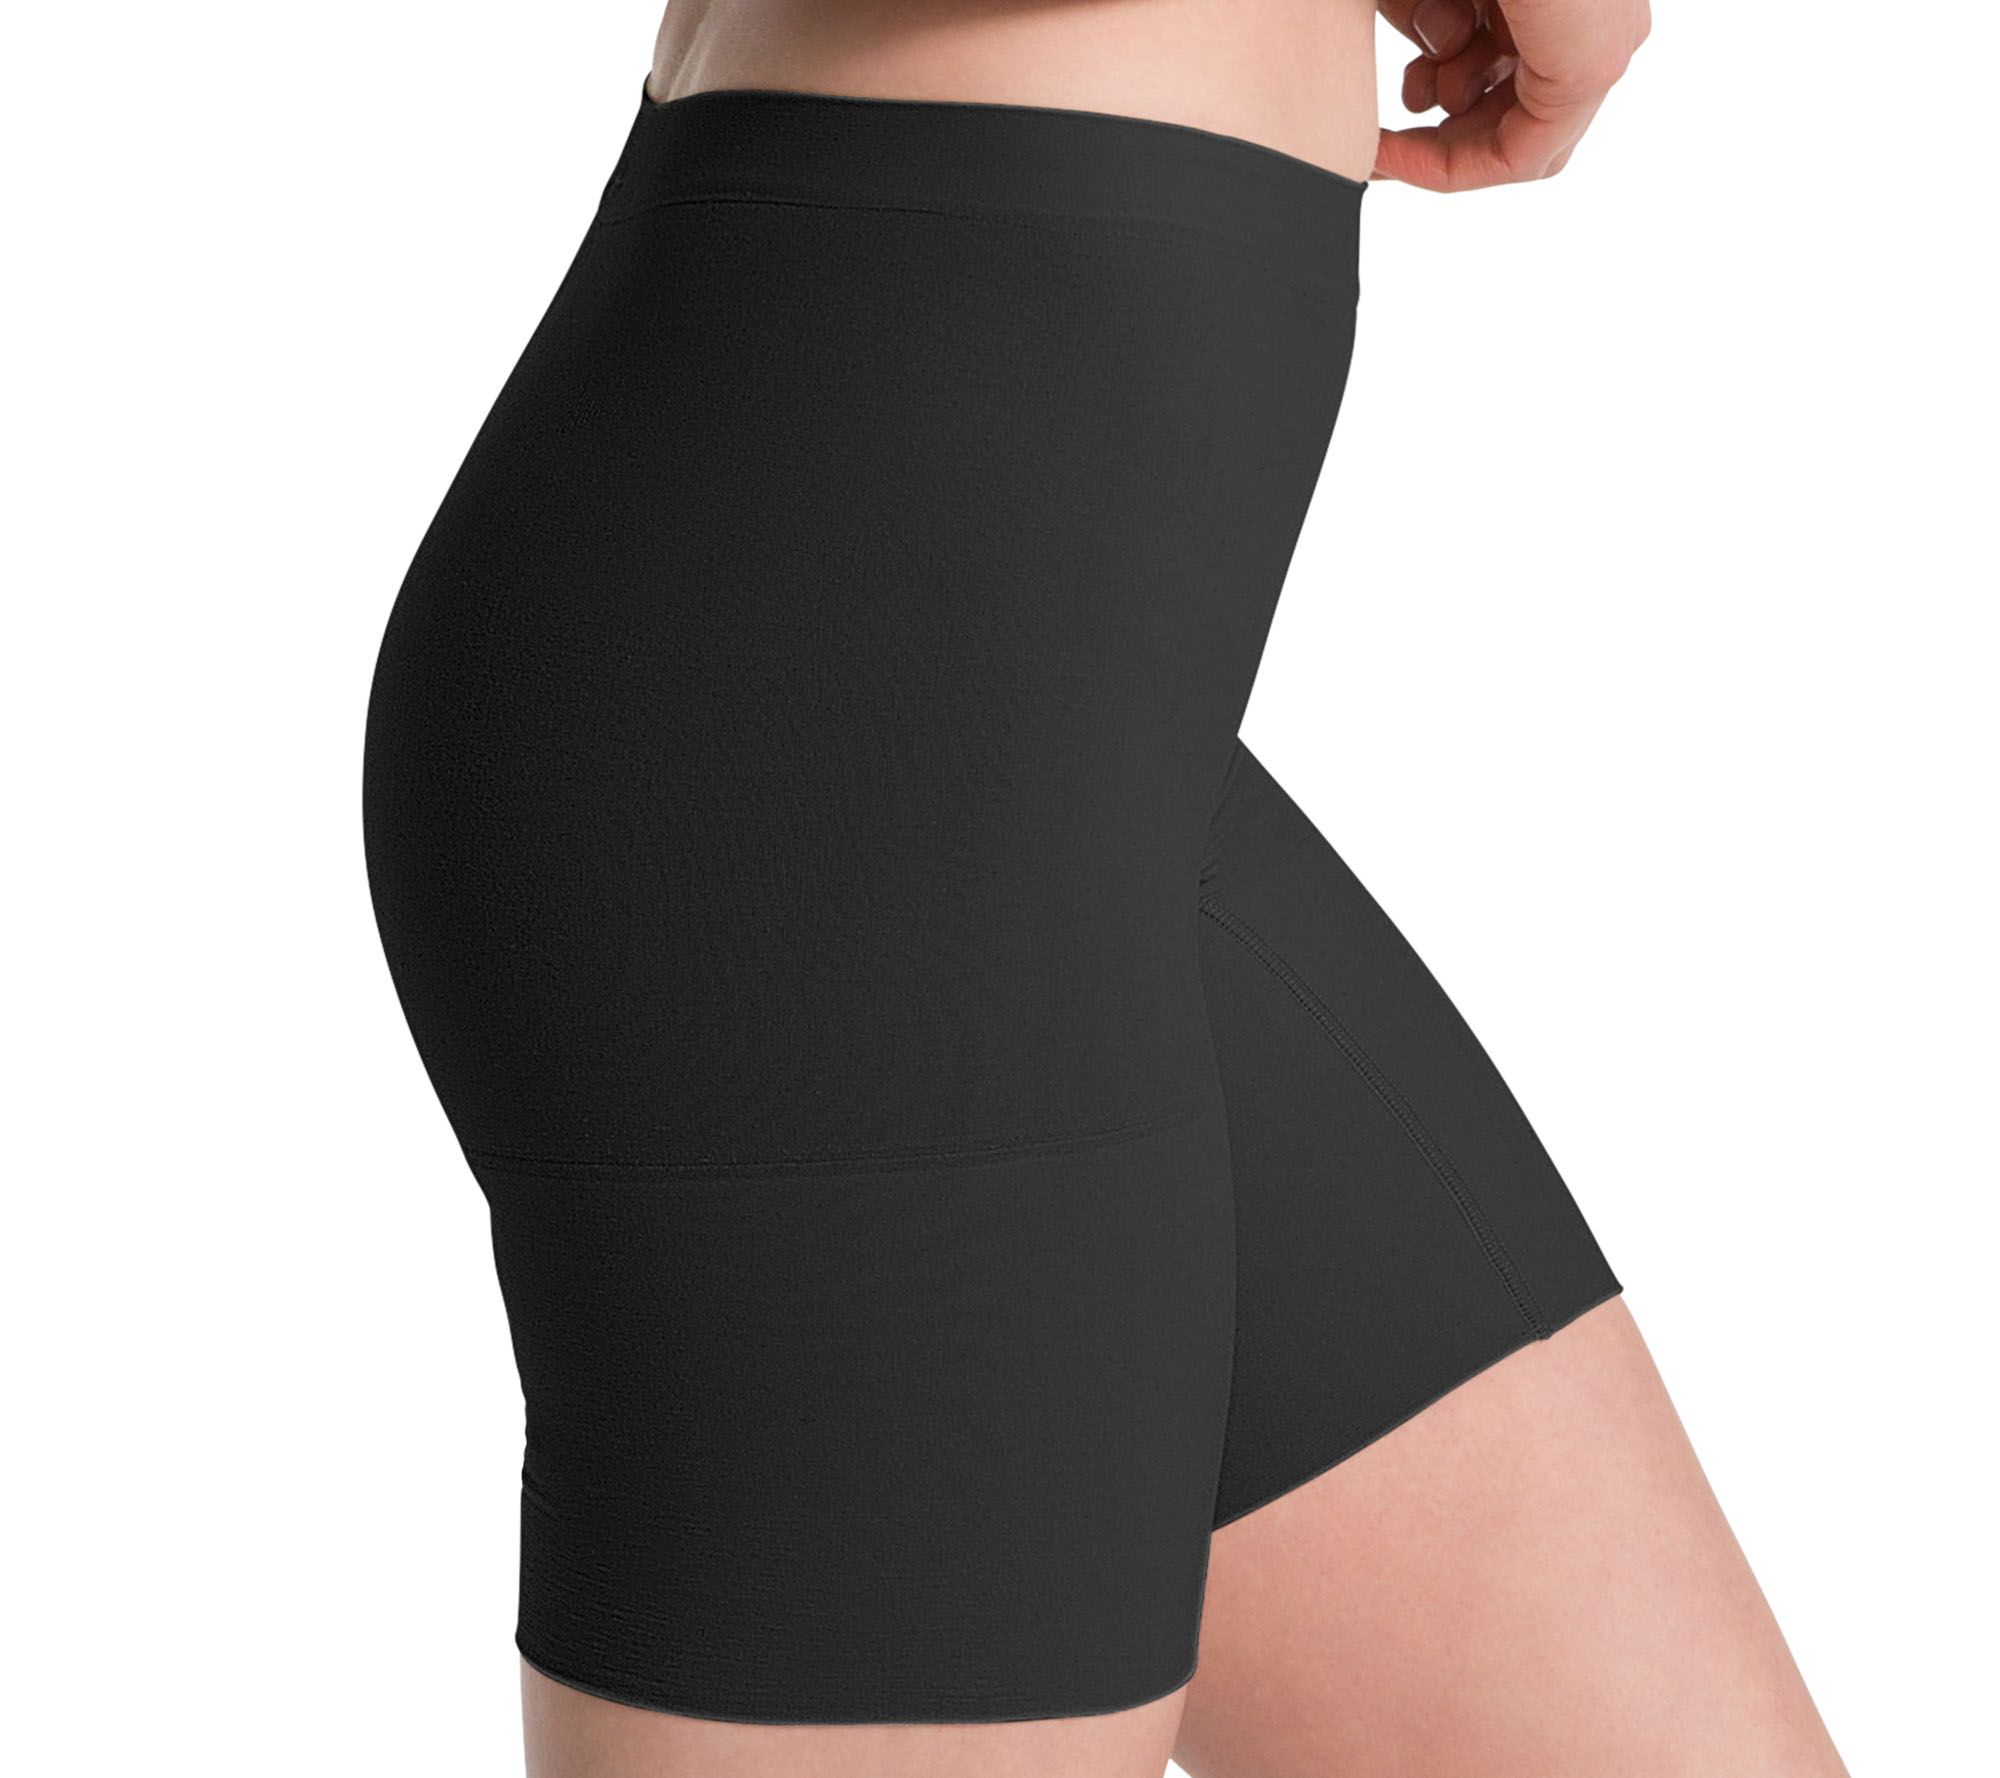 SPANX Higher Power Shorts - High-Rise Waist with Double Gusset Design  Functional